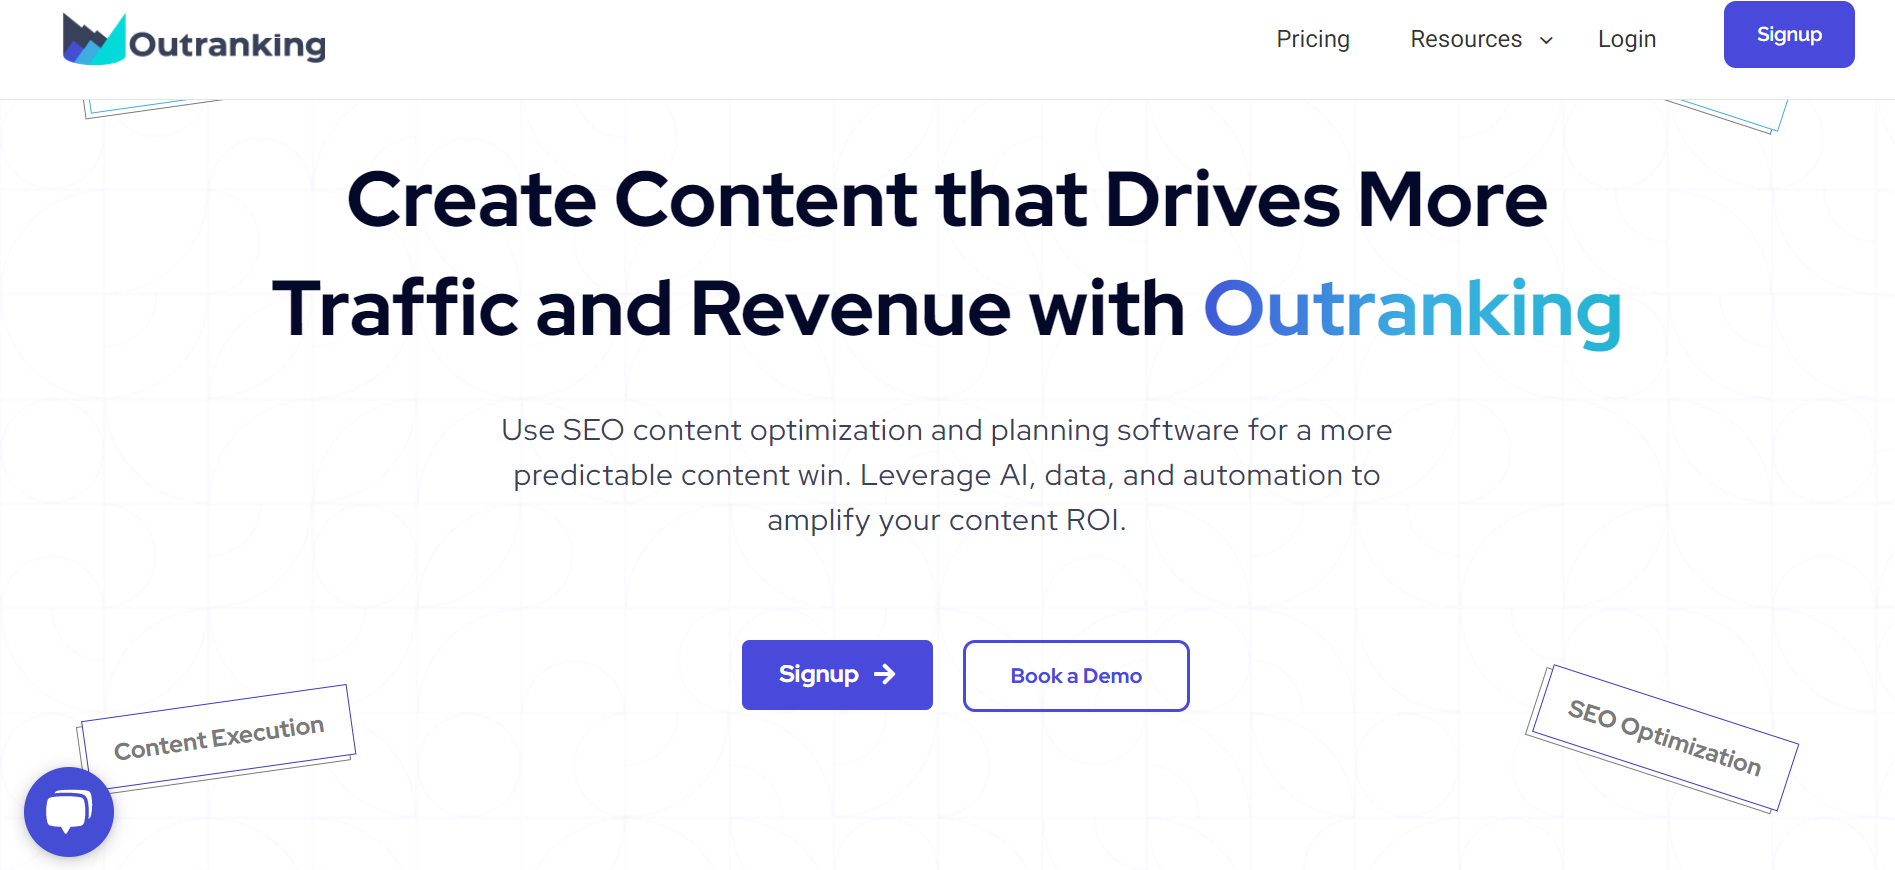 Outranking Landing Page - "Create Content that Drives More Traffic and Revenue with Outranking"